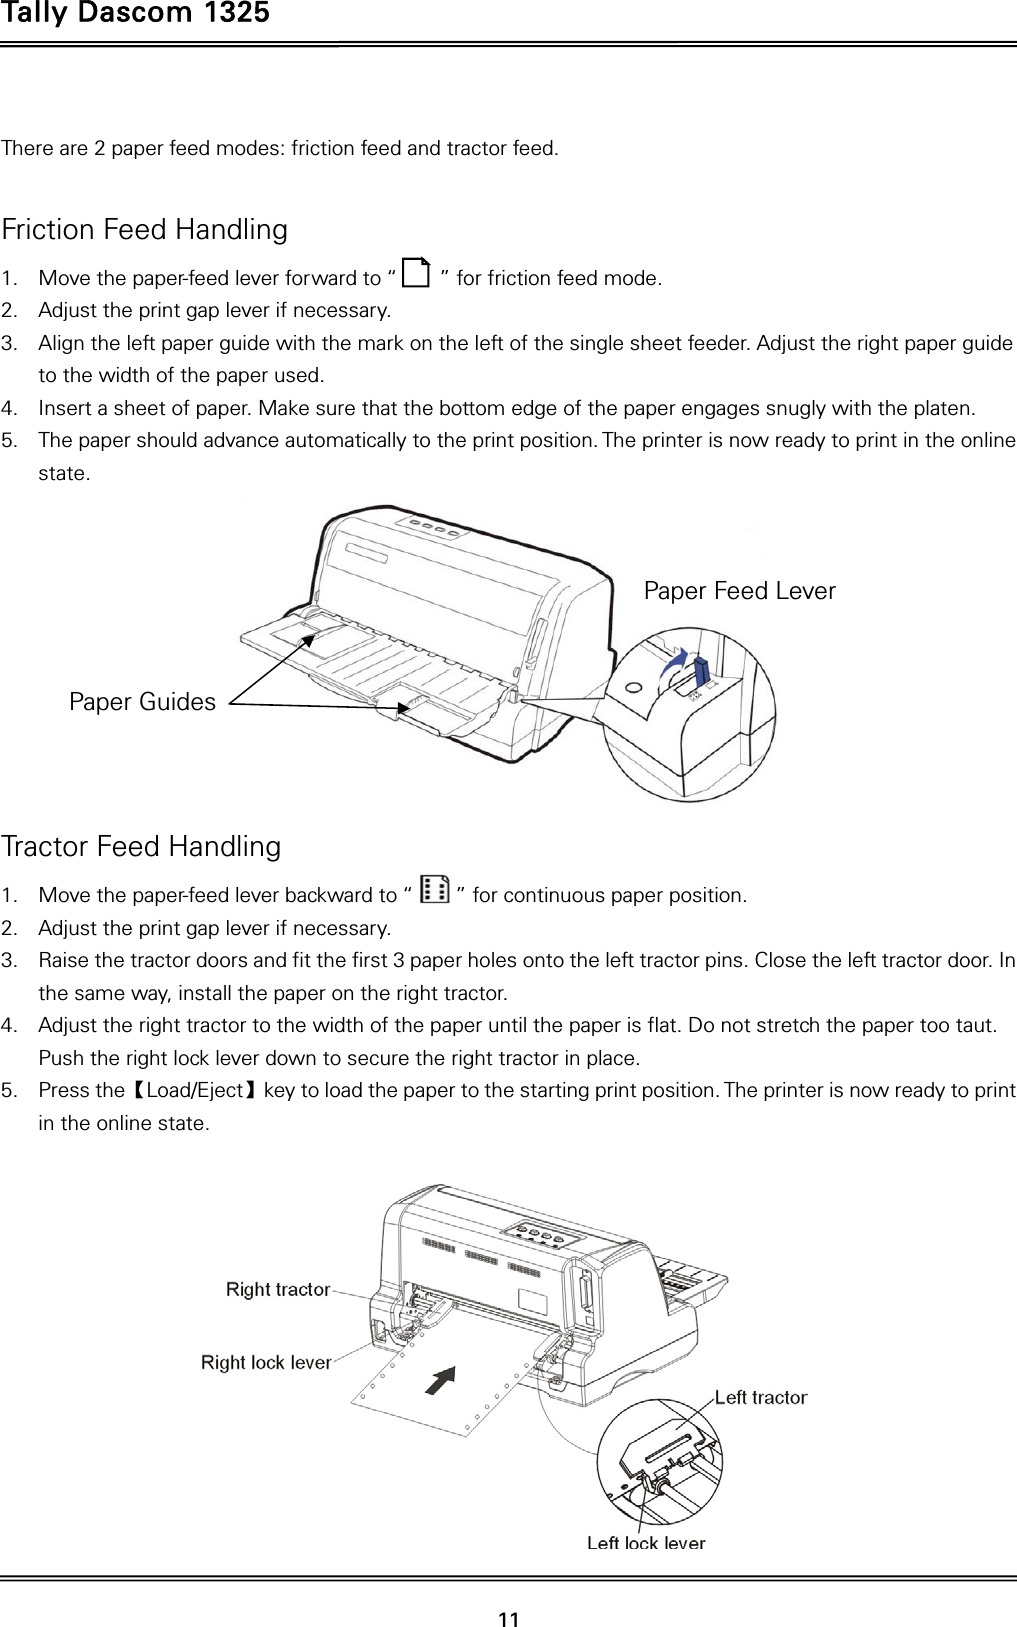 Tally Dascom 1325   11   There are 2 paper feed modes: friction feed and tractor feed.   Friction Feed Handling 1. Move the paper-feed lever forward to “        ” for friction feed mode. 2. Adjust the print gap lever if necessary.   3. Align the left paper guide with the mark on the left of the single sheet feeder. Adjust the right paper guide to the width of the paper used. 4. Insert a sheet of paper. Make sure that the bottom edge of the paper engages snugly with the platen. 5. The paper should advance automatically to the print position. The printer is now ready to print in the online state.   Tractor Feed Handling 1. Move the paper-feed lever backward to “        ” for continuous paper position. 2. Adjust the print gap lever if necessary.   3. Raise the tractor doors and fit the first 3 paper holes onto the left tractor pins. Close the left tractor door. In the same way, install the paper on the right tractor.   4. Adjust the right tractor to the width of the paper until the paper is flat. Do not stretch the paper too taut. Push the right lock lever down to secure the right tractor in place. 5. Press the【Load/Eject】key to load the paper to the starting print position. The printer is now ready to print in the online state.   Paper Feed Lever Paper Guides